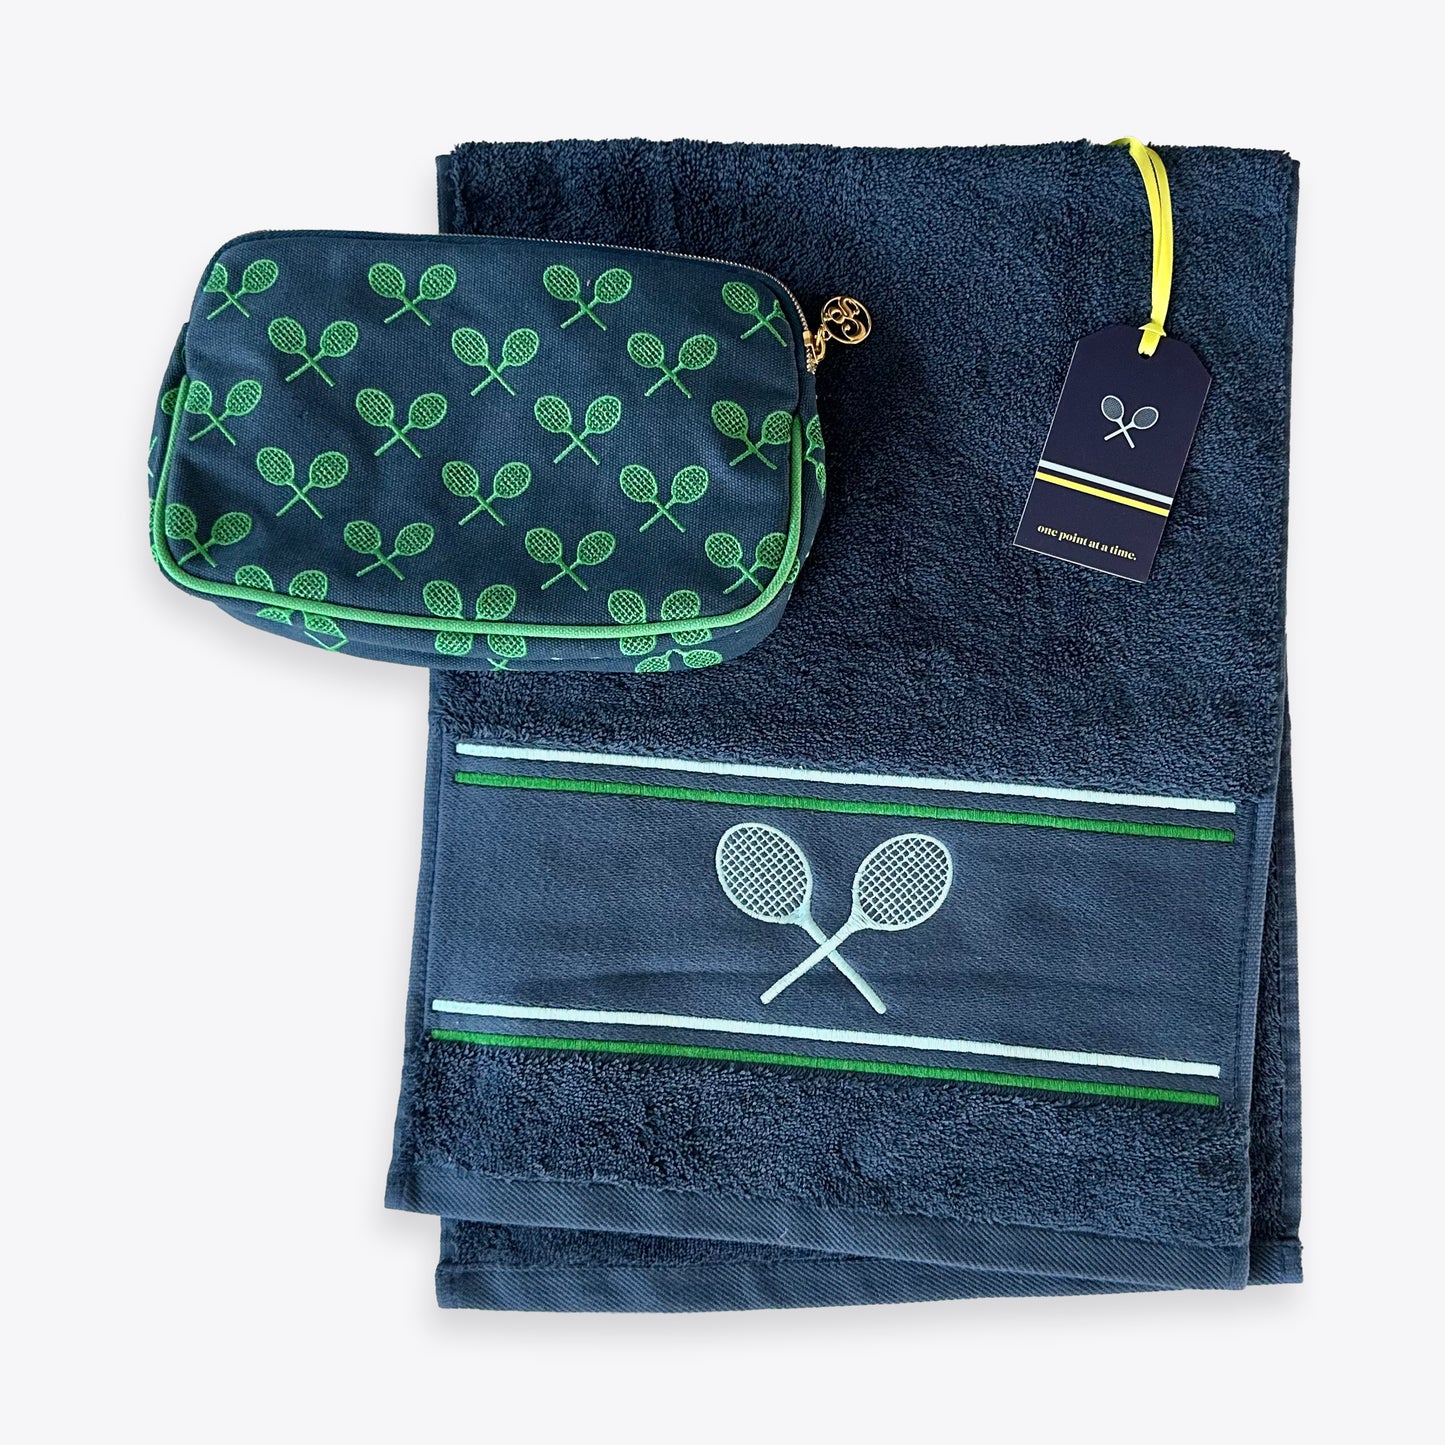 Matchtime Pouch + Navy Towel Gift Set